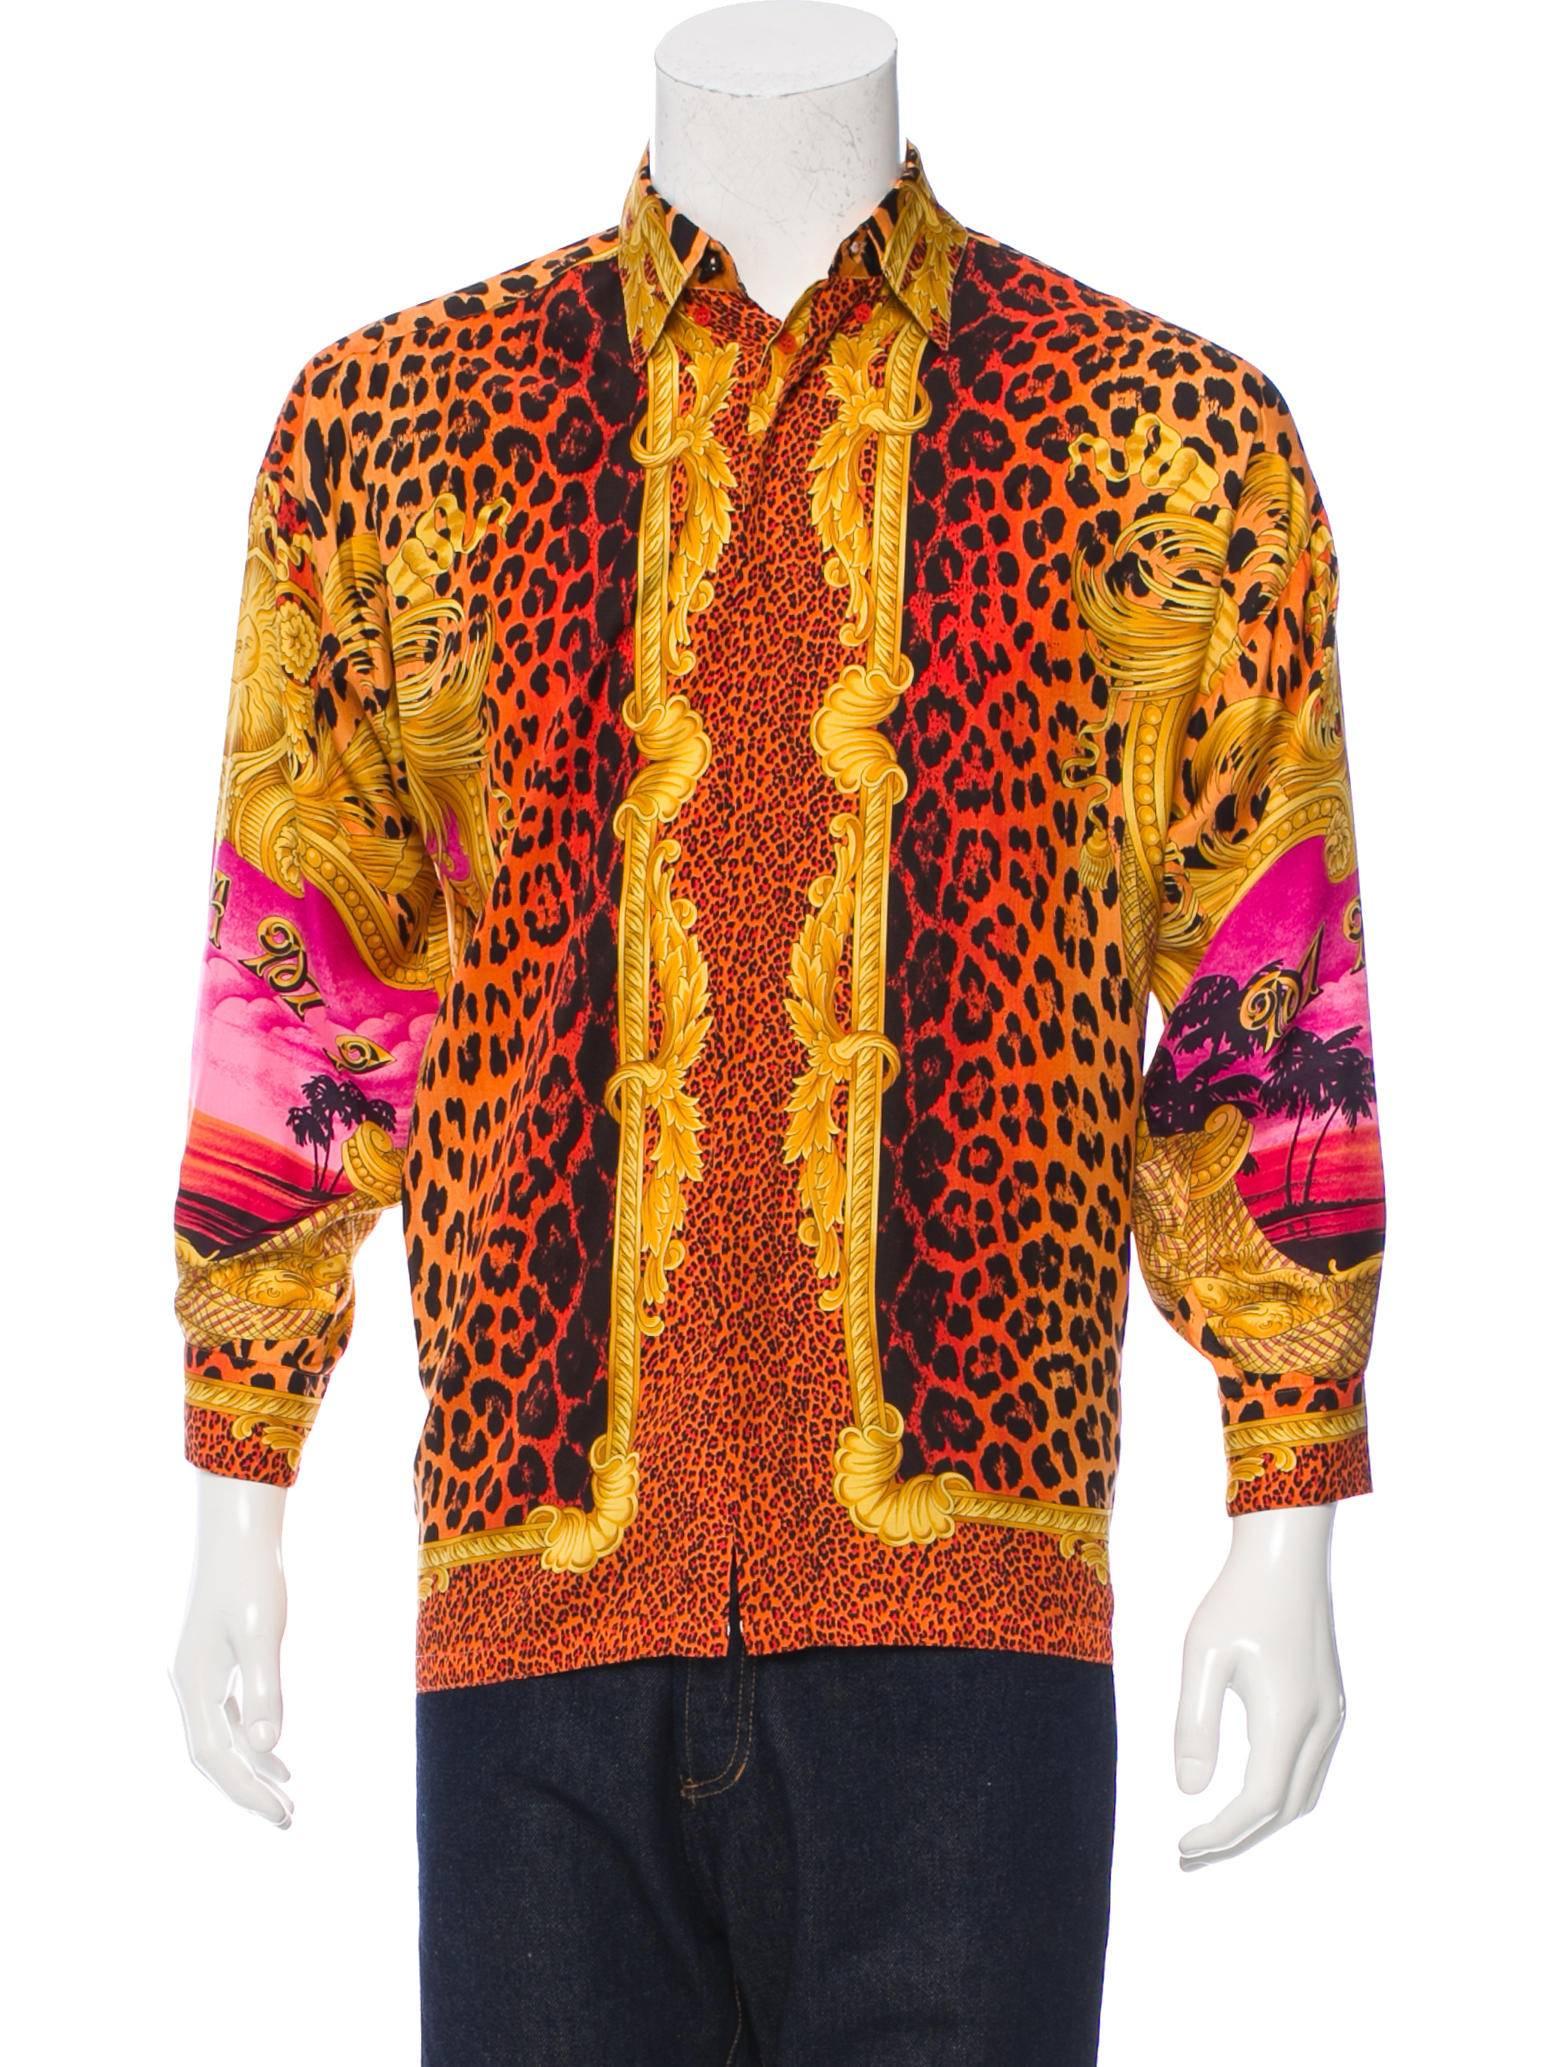 Gianni Versace Collectable 1993 Miami Silk Shirt with Leopard Print.
Italian size 46, US size 36 
Chest: 40"
Length: 29.5"
Sleeve: 32"
Neck: 15.5"
